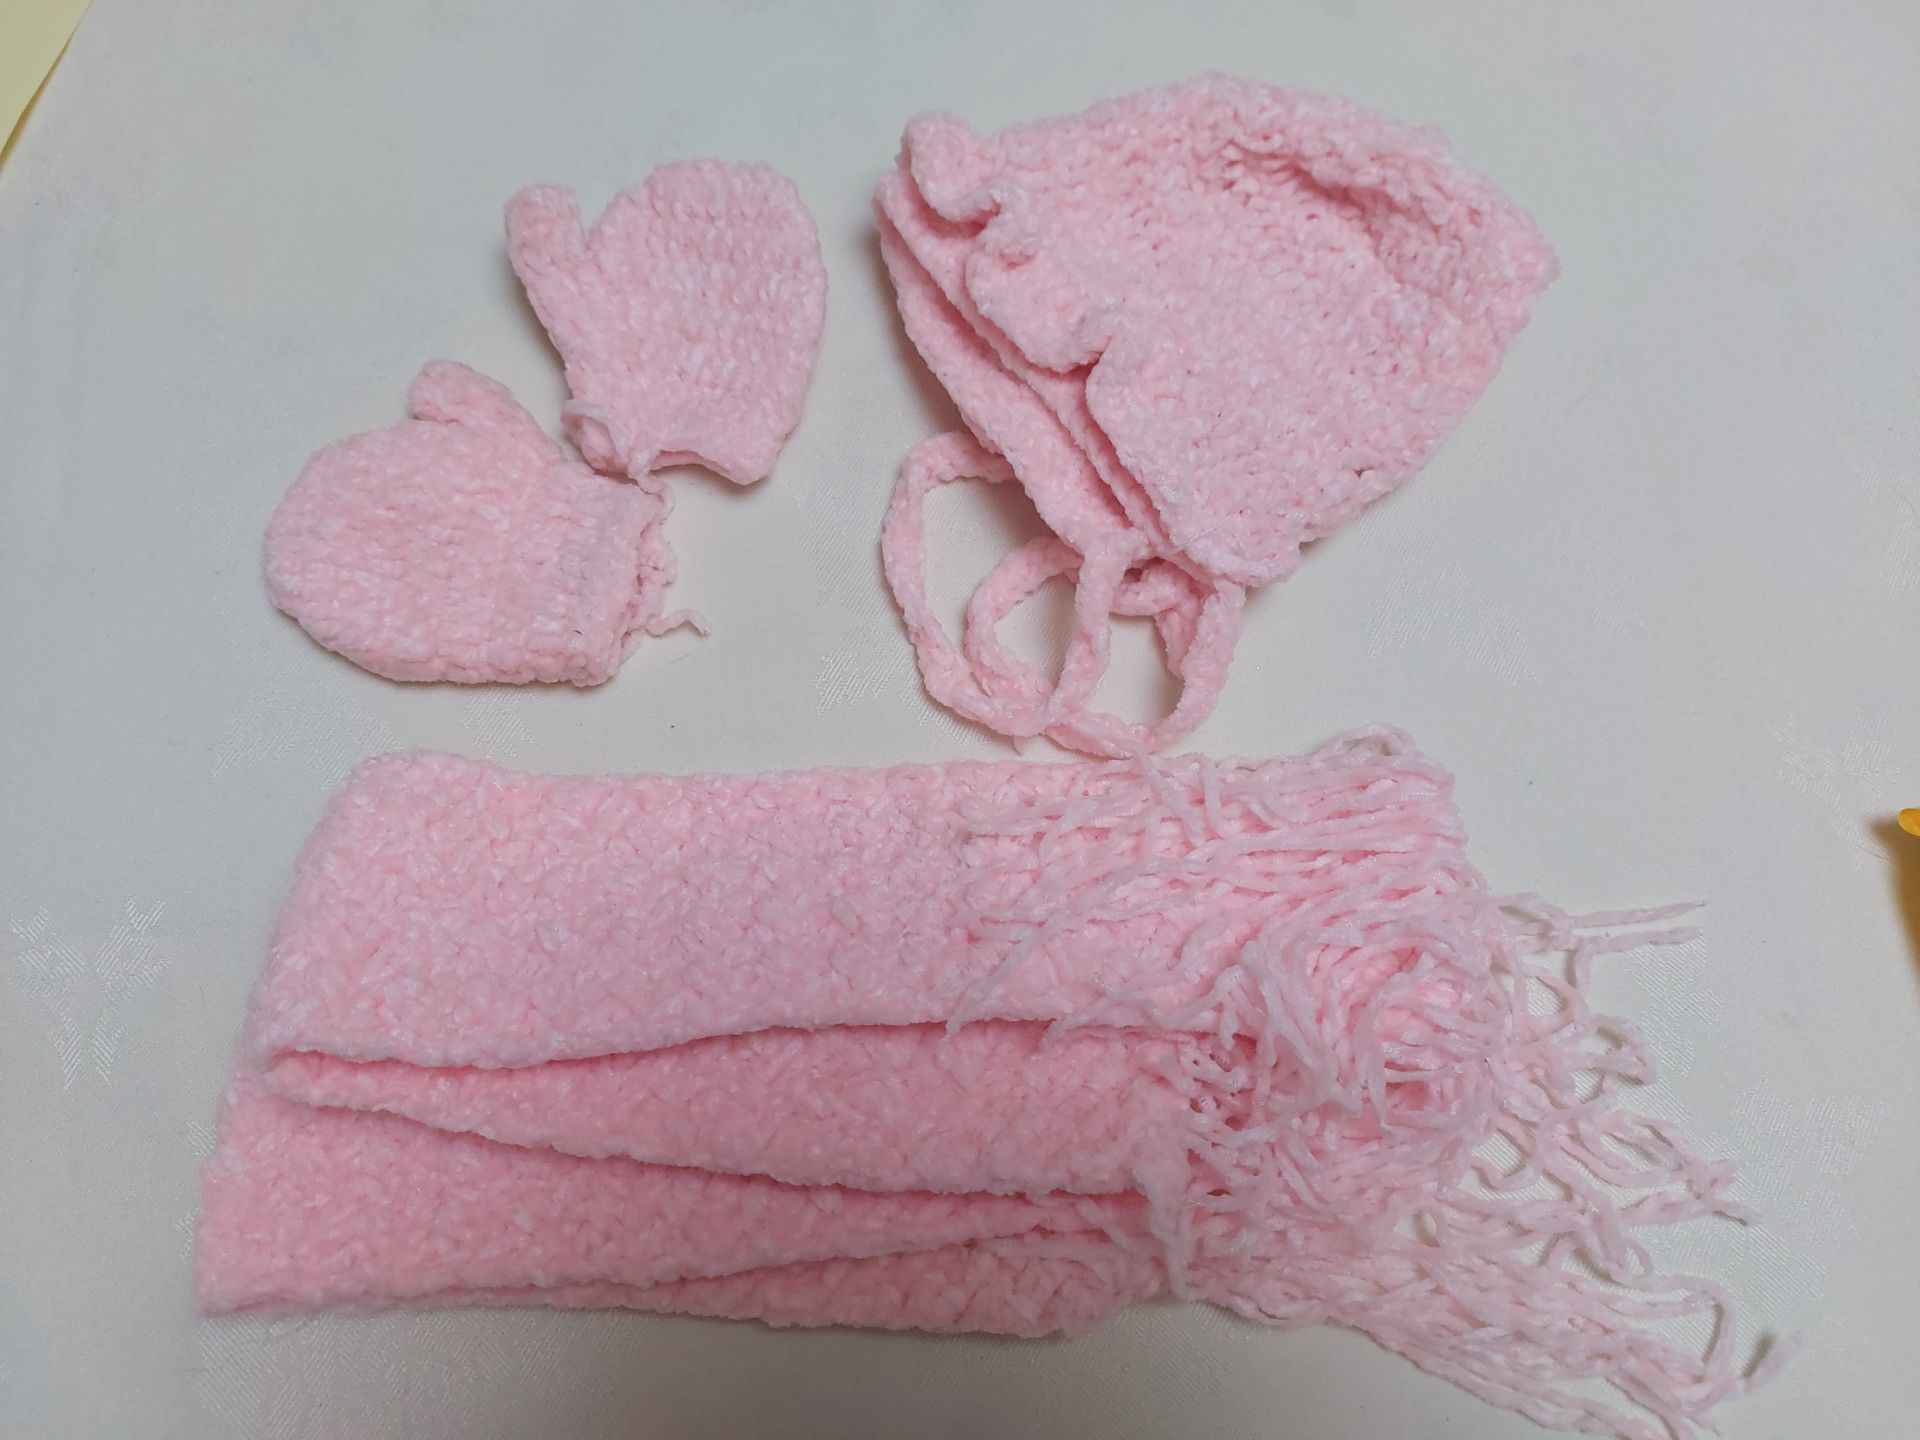 Pink and Blue Hats, Scarves and Gloves - Min 15 Items